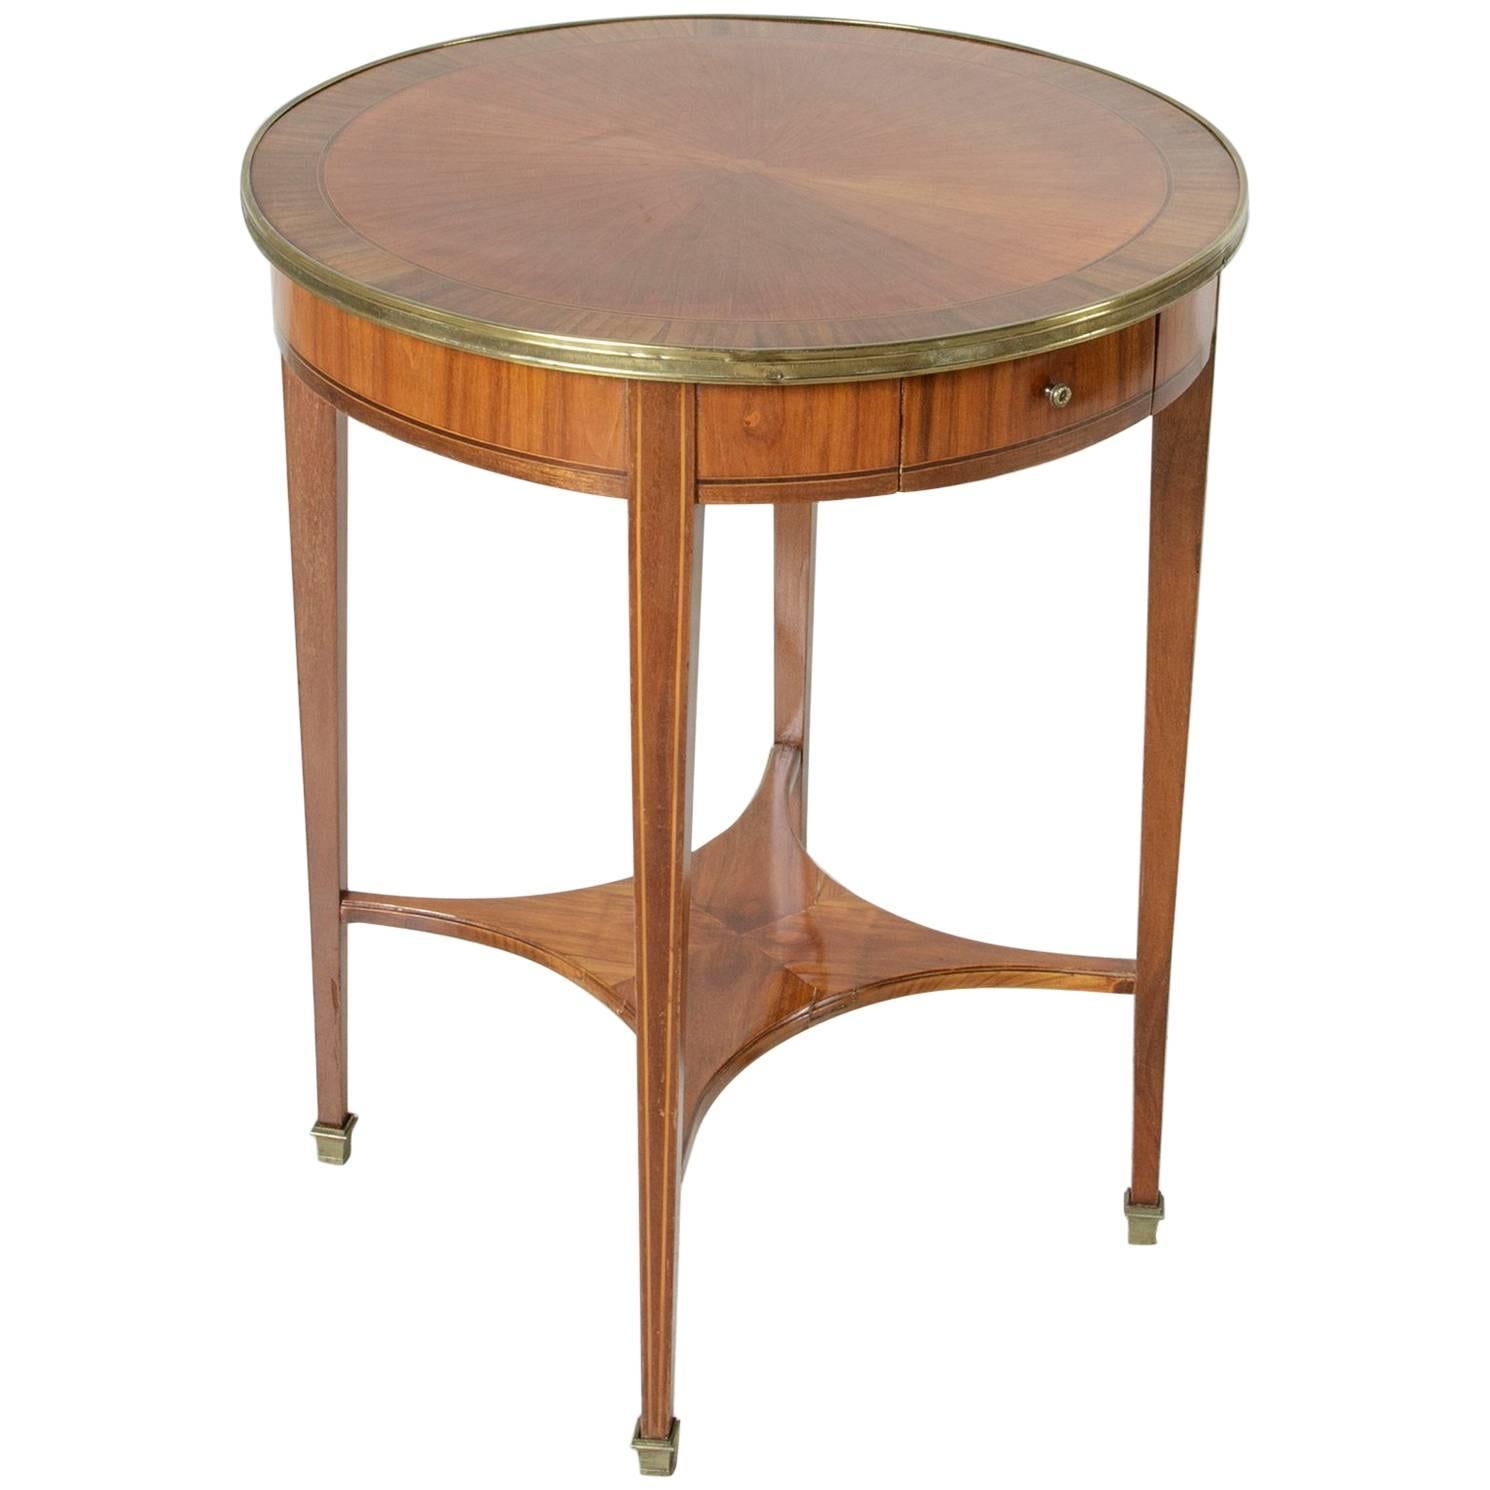 Art Deco Period Rosewood and Walnut Marquetry Gueridon or Side Table, Brass Trim